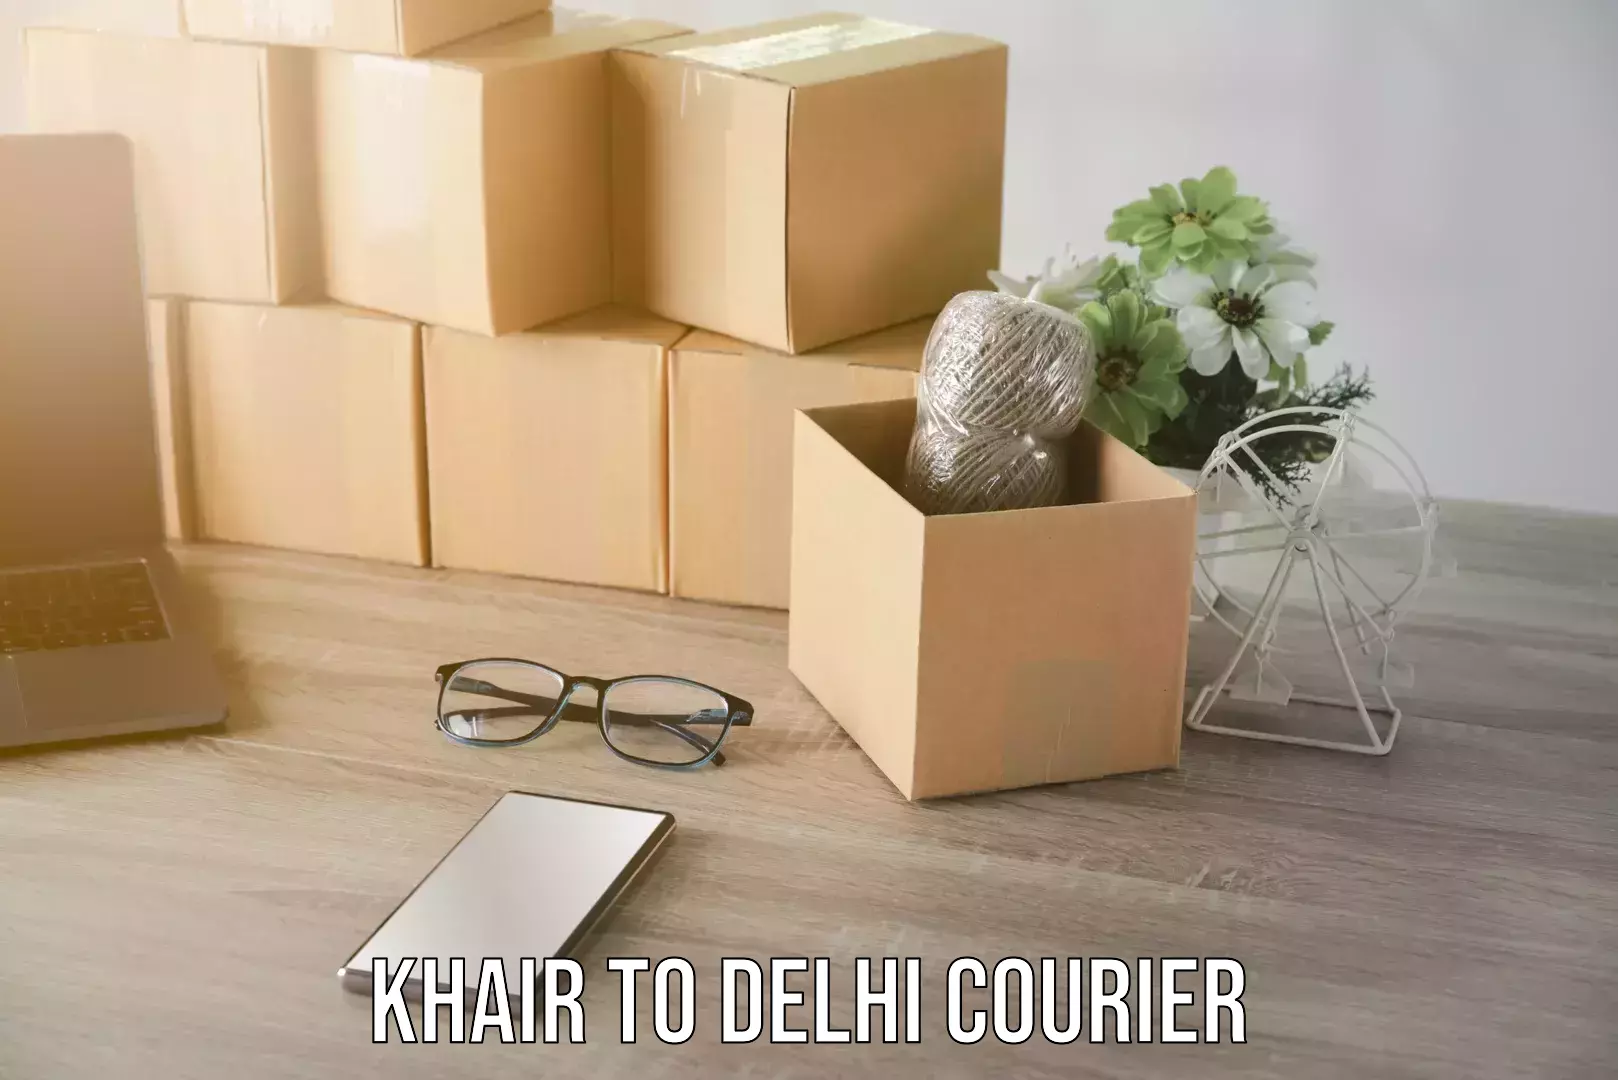 Residential moving experts Khair to Delhi